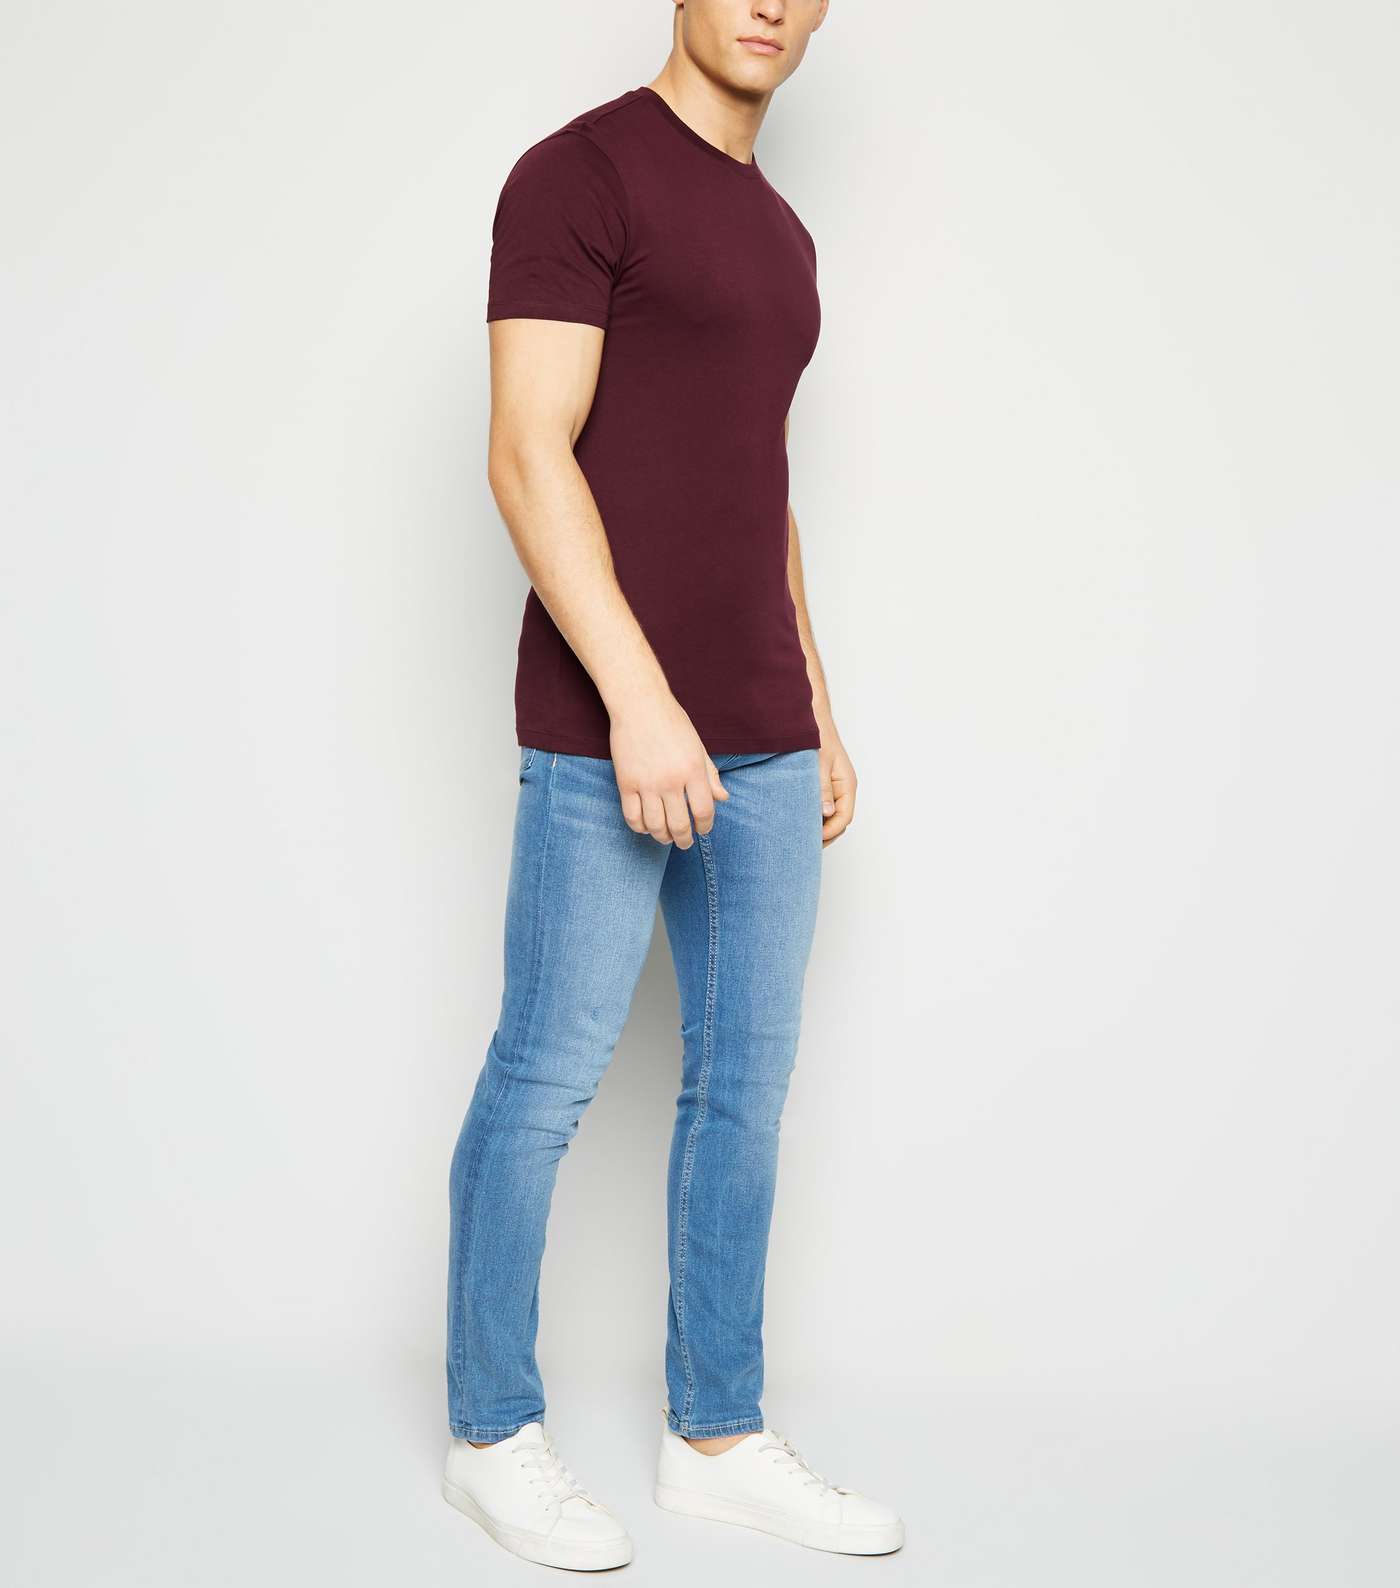 Burgundy Crew Neck Muscle Fit T-Shirt Image 2